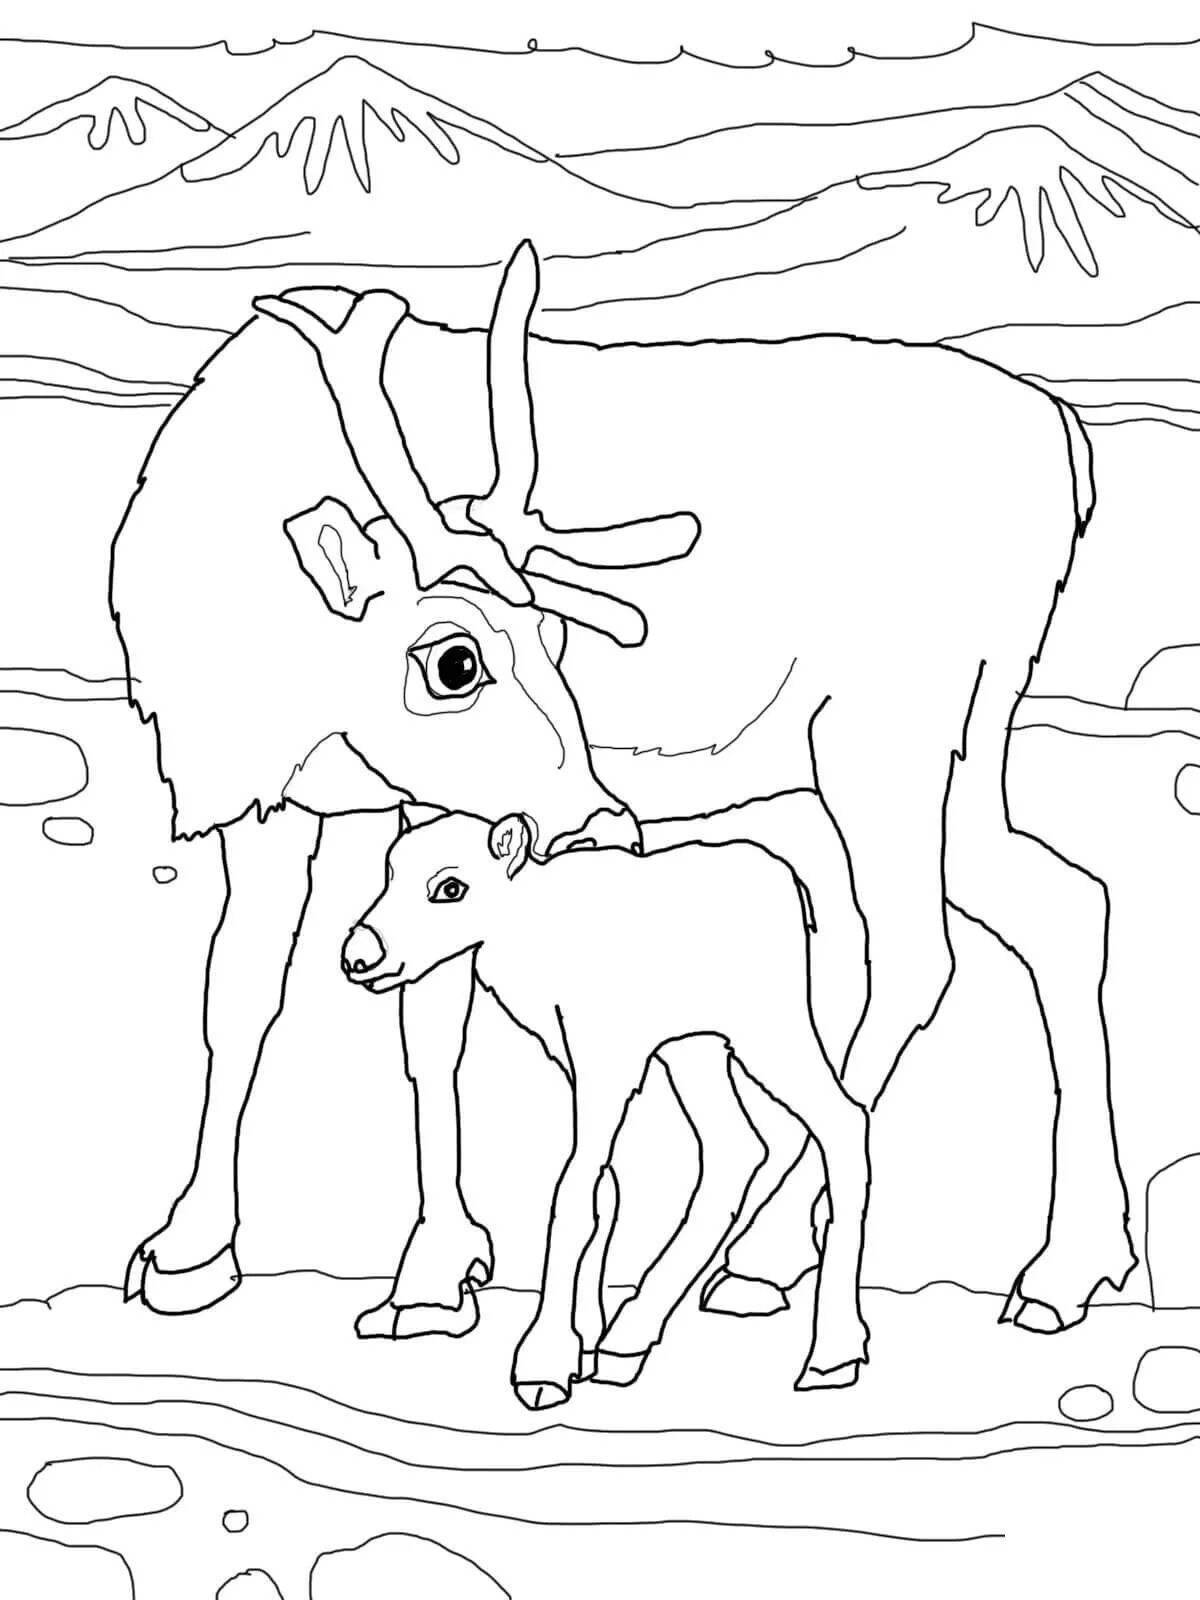 Norse animals coloring book